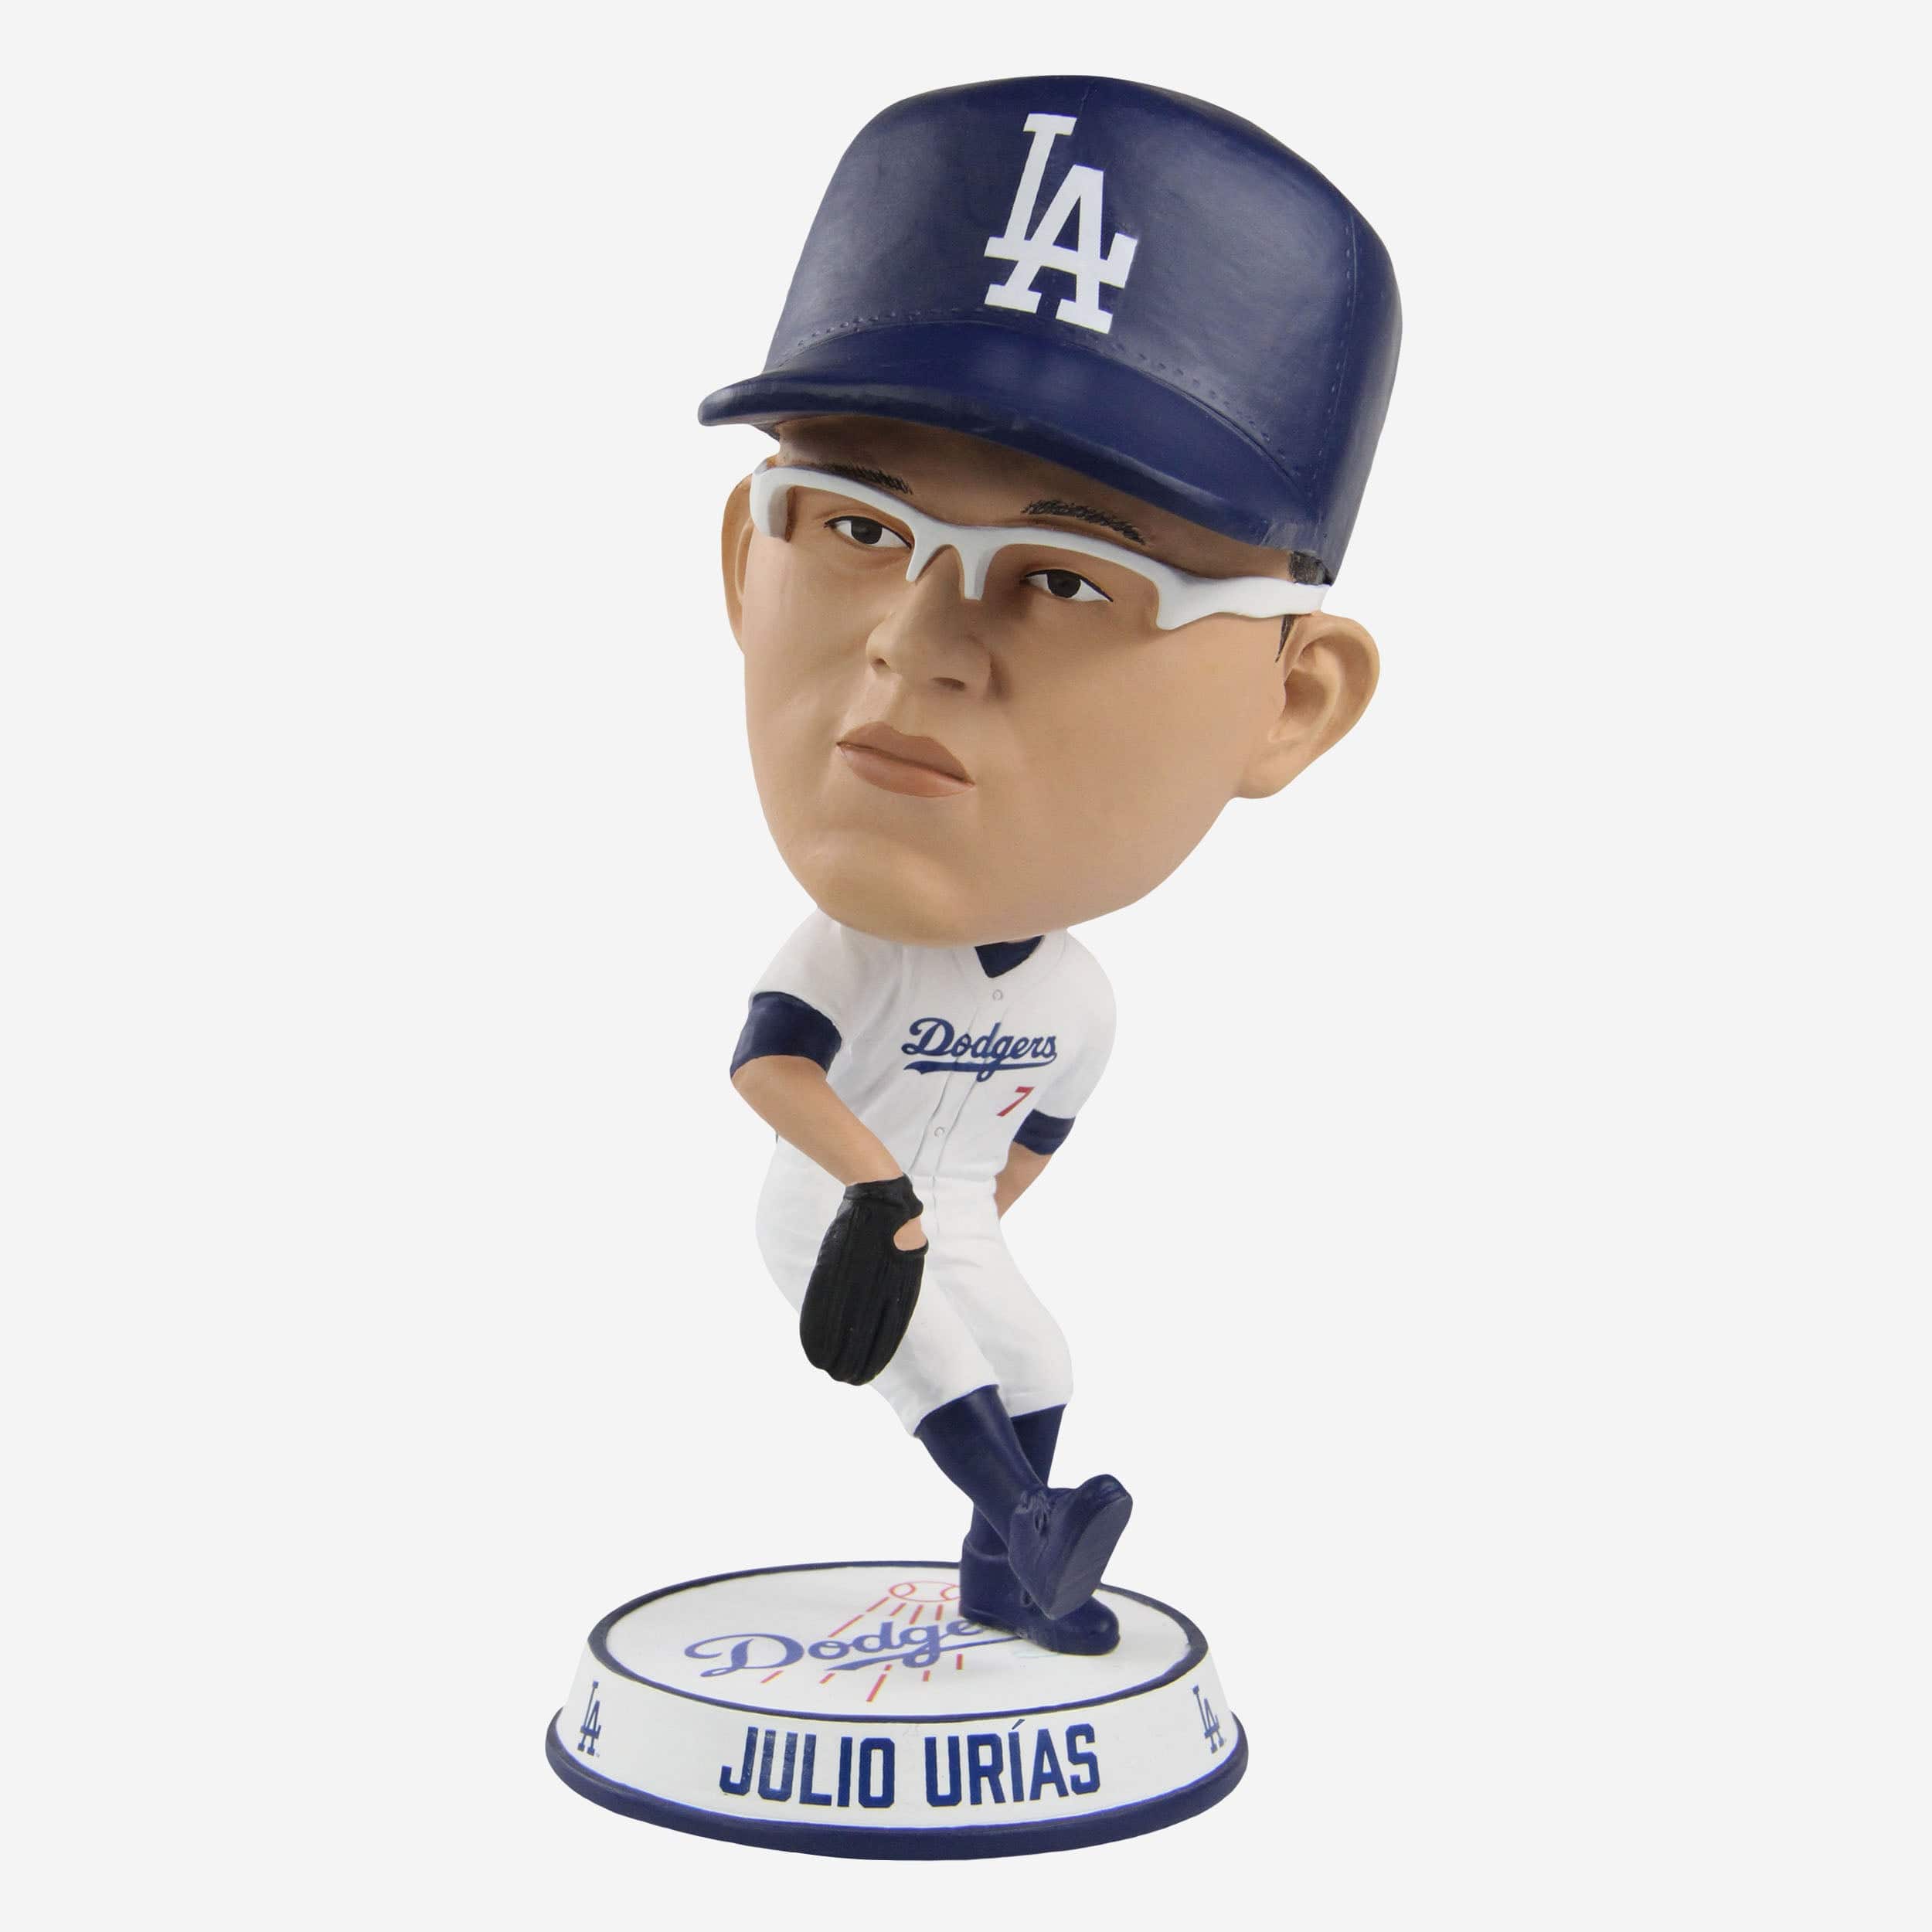 Julio urias bobblehead $14.99 or trade for Sale in South Gate, CA